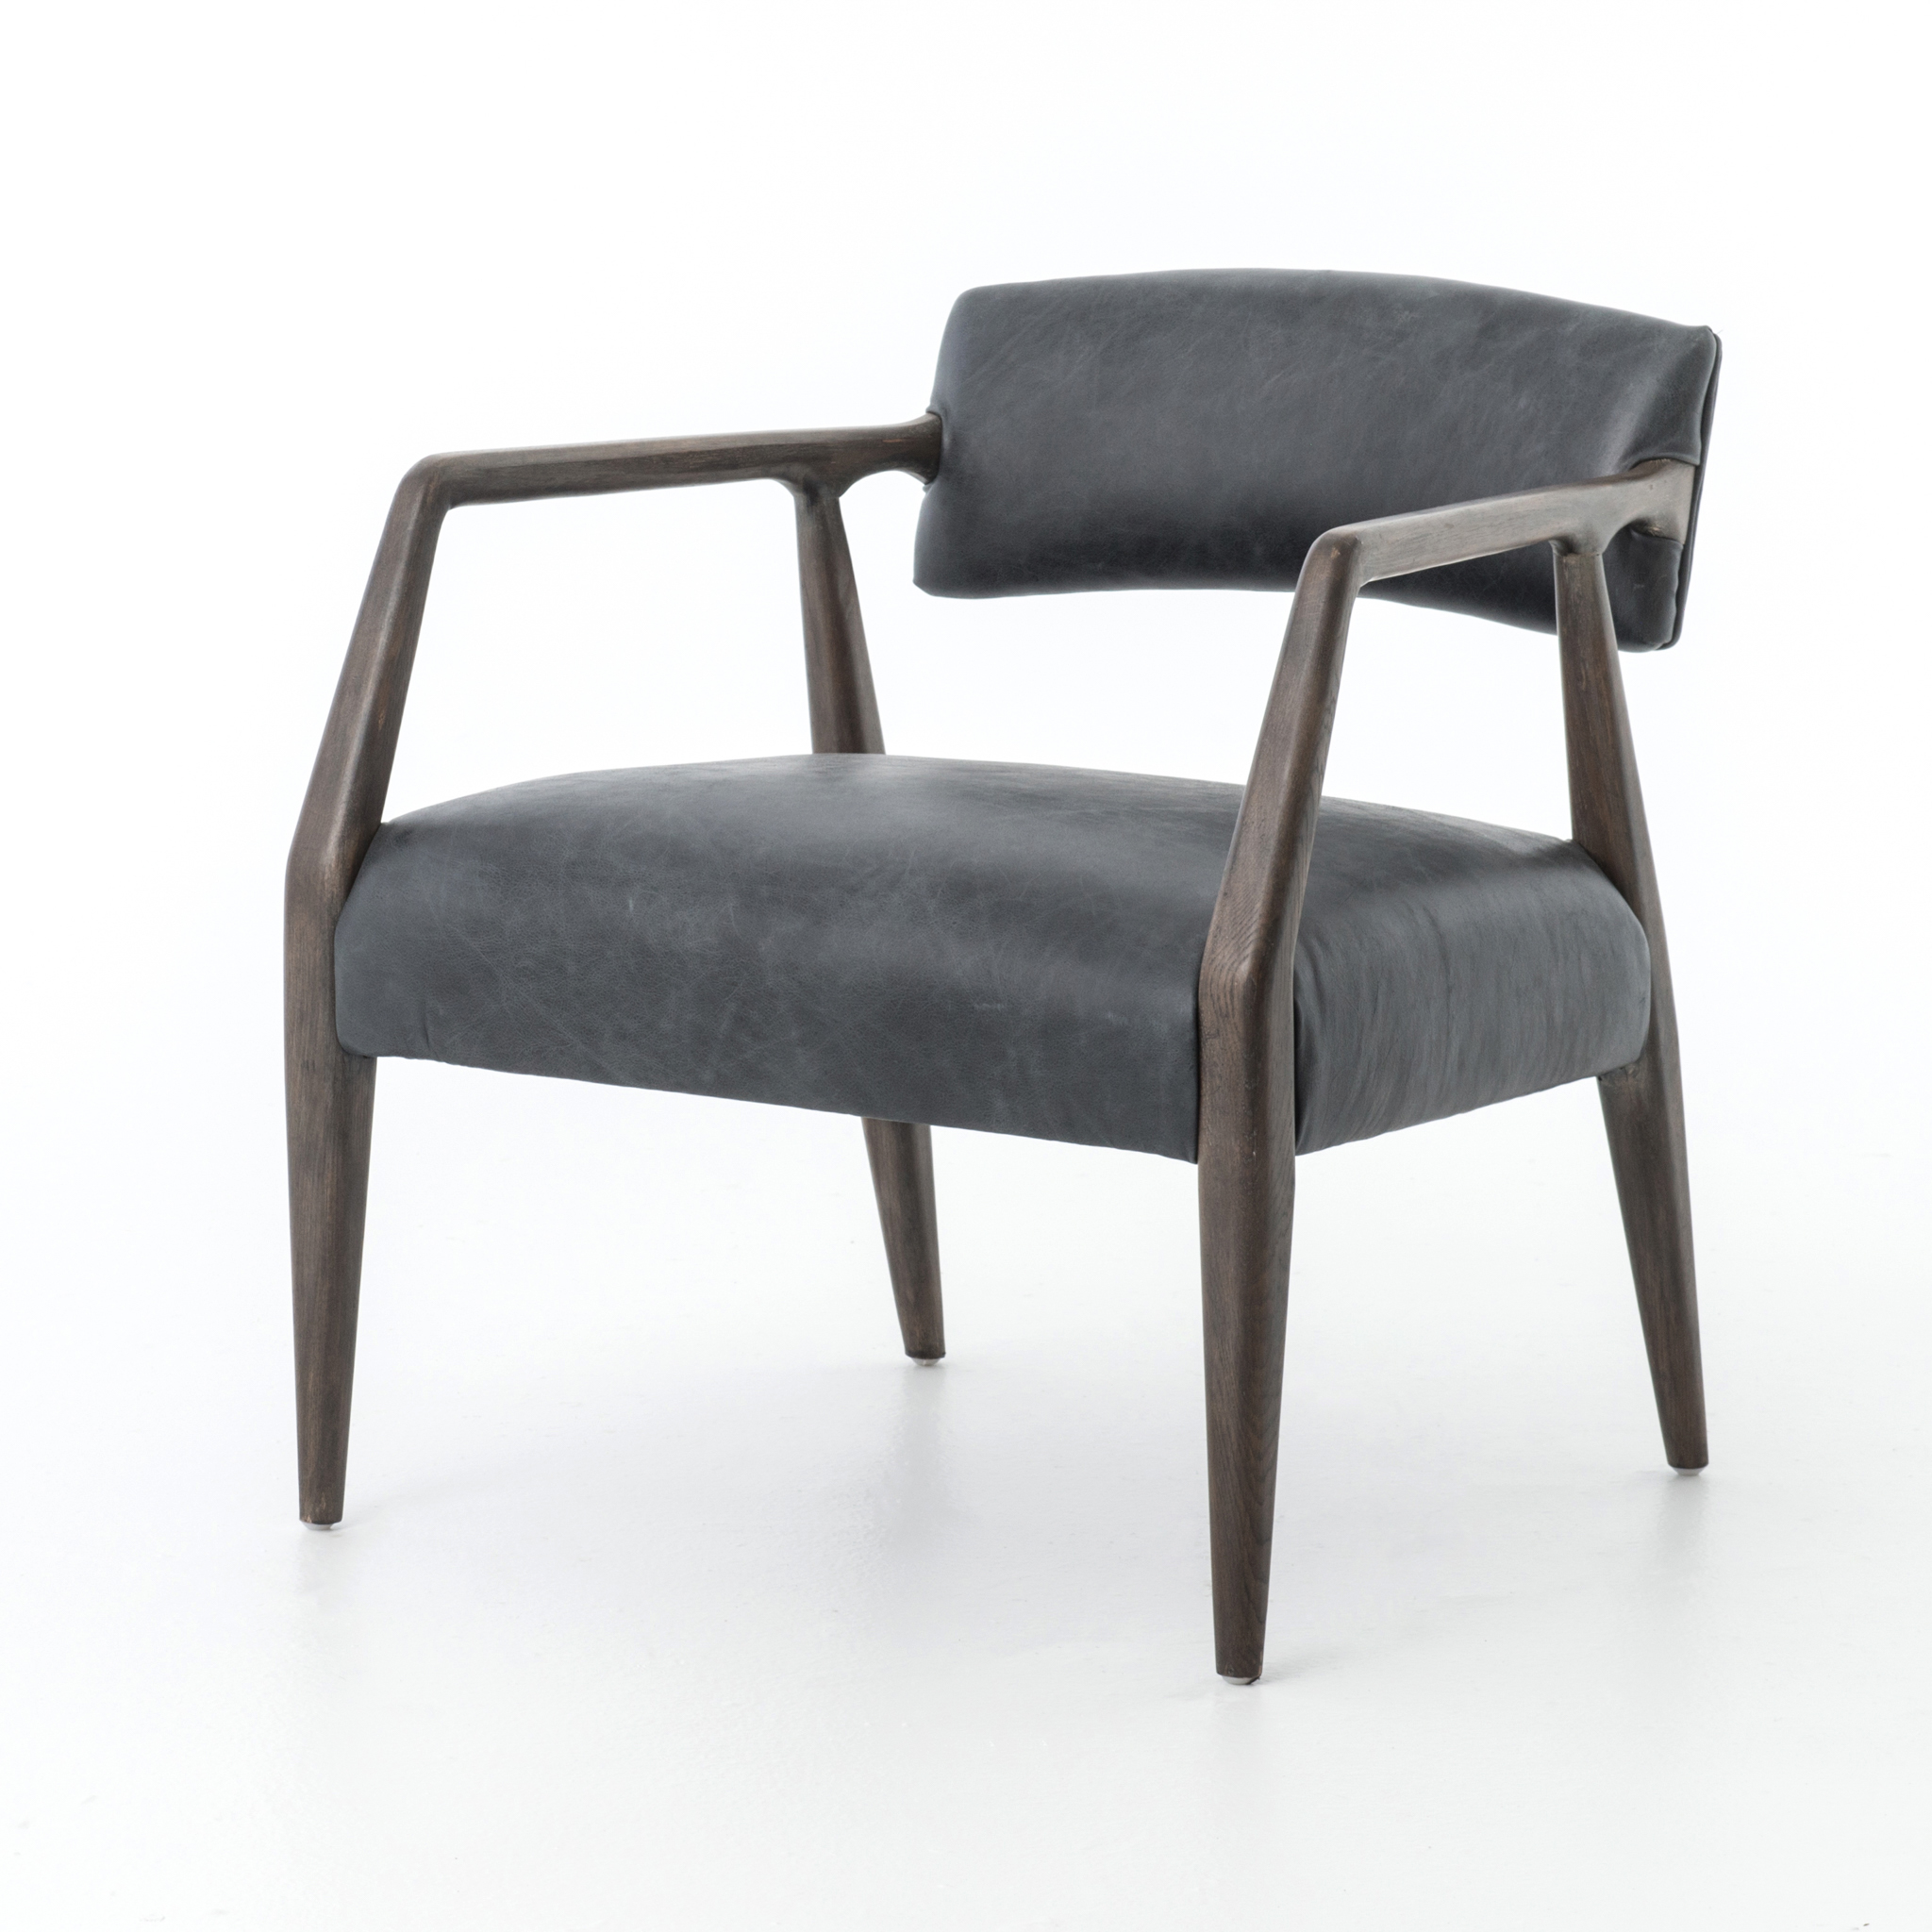 Tyler arm chair by Four Hands